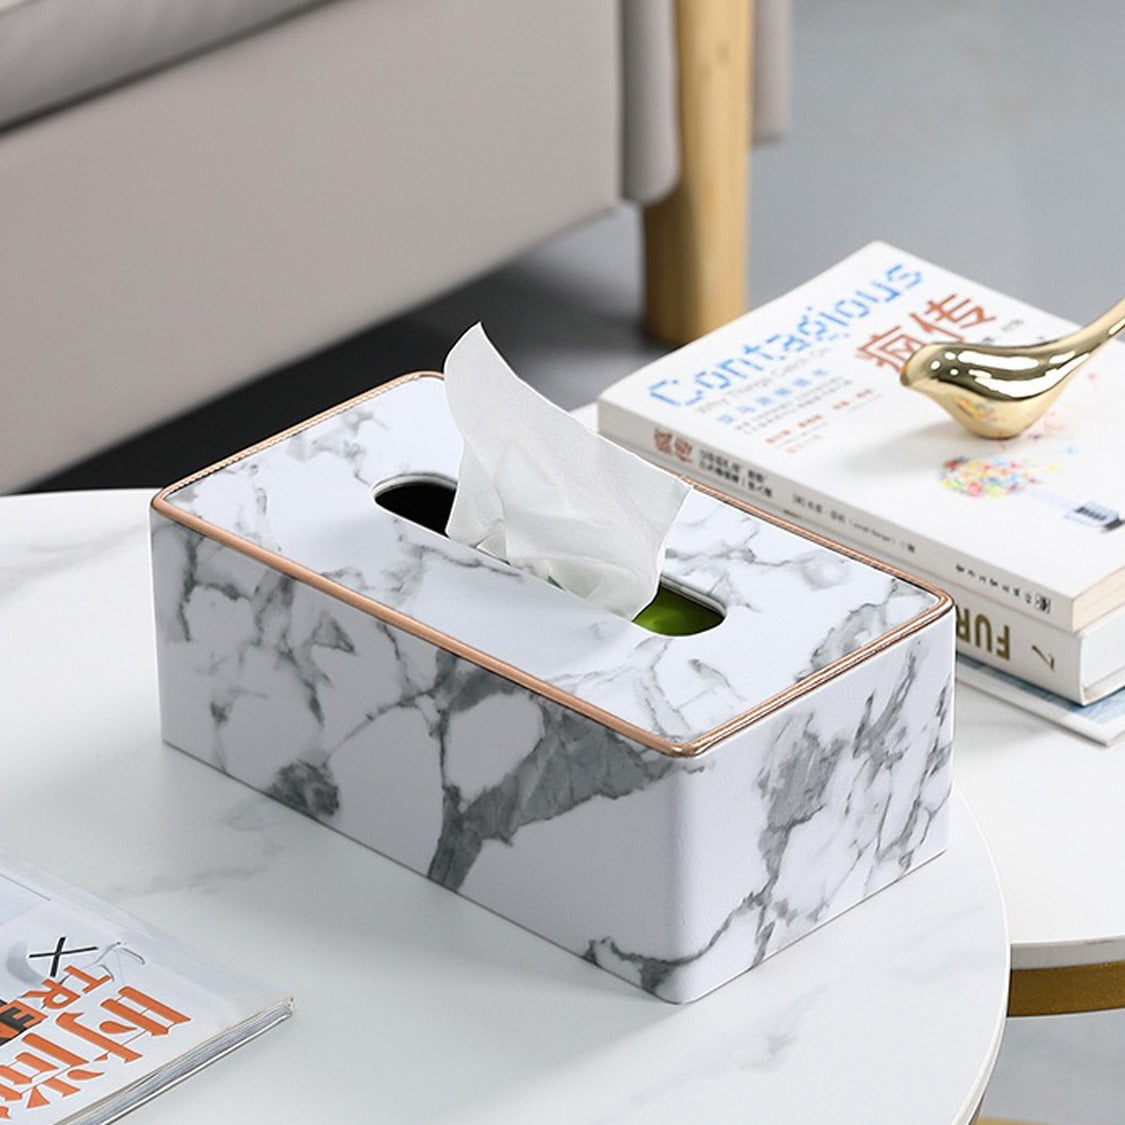 Rectangular Tissue Box Holder placed on the table next to a book